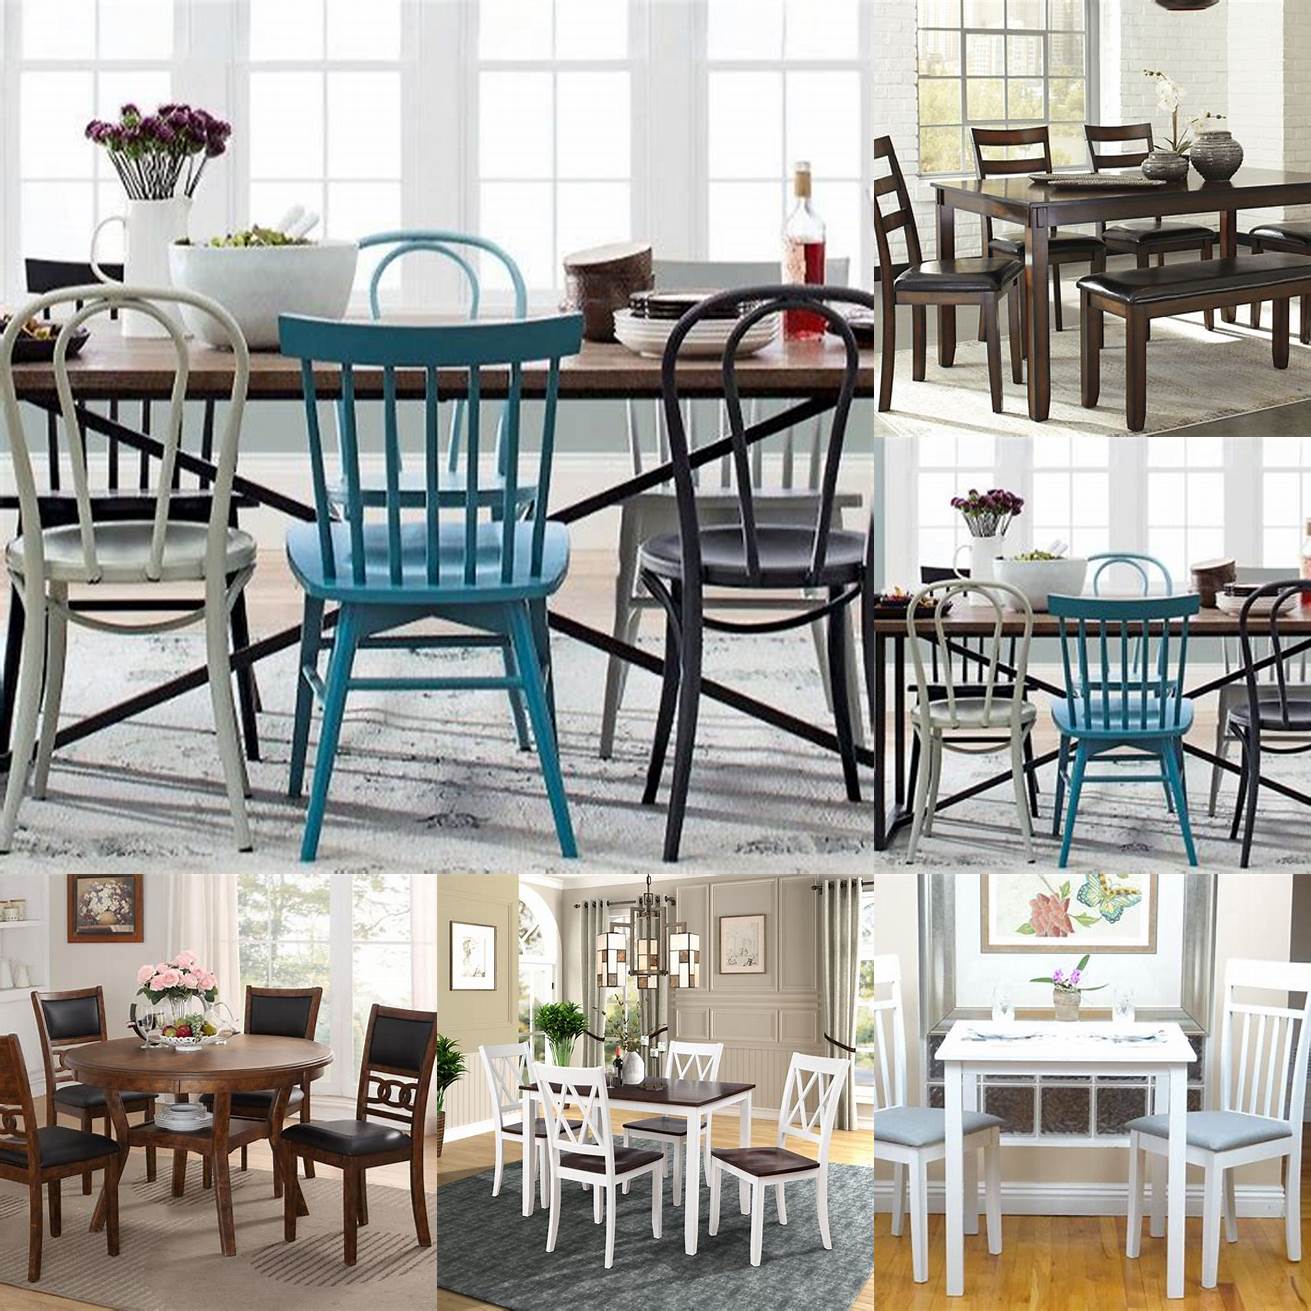 2 Sturdy and versatile tables and chairs